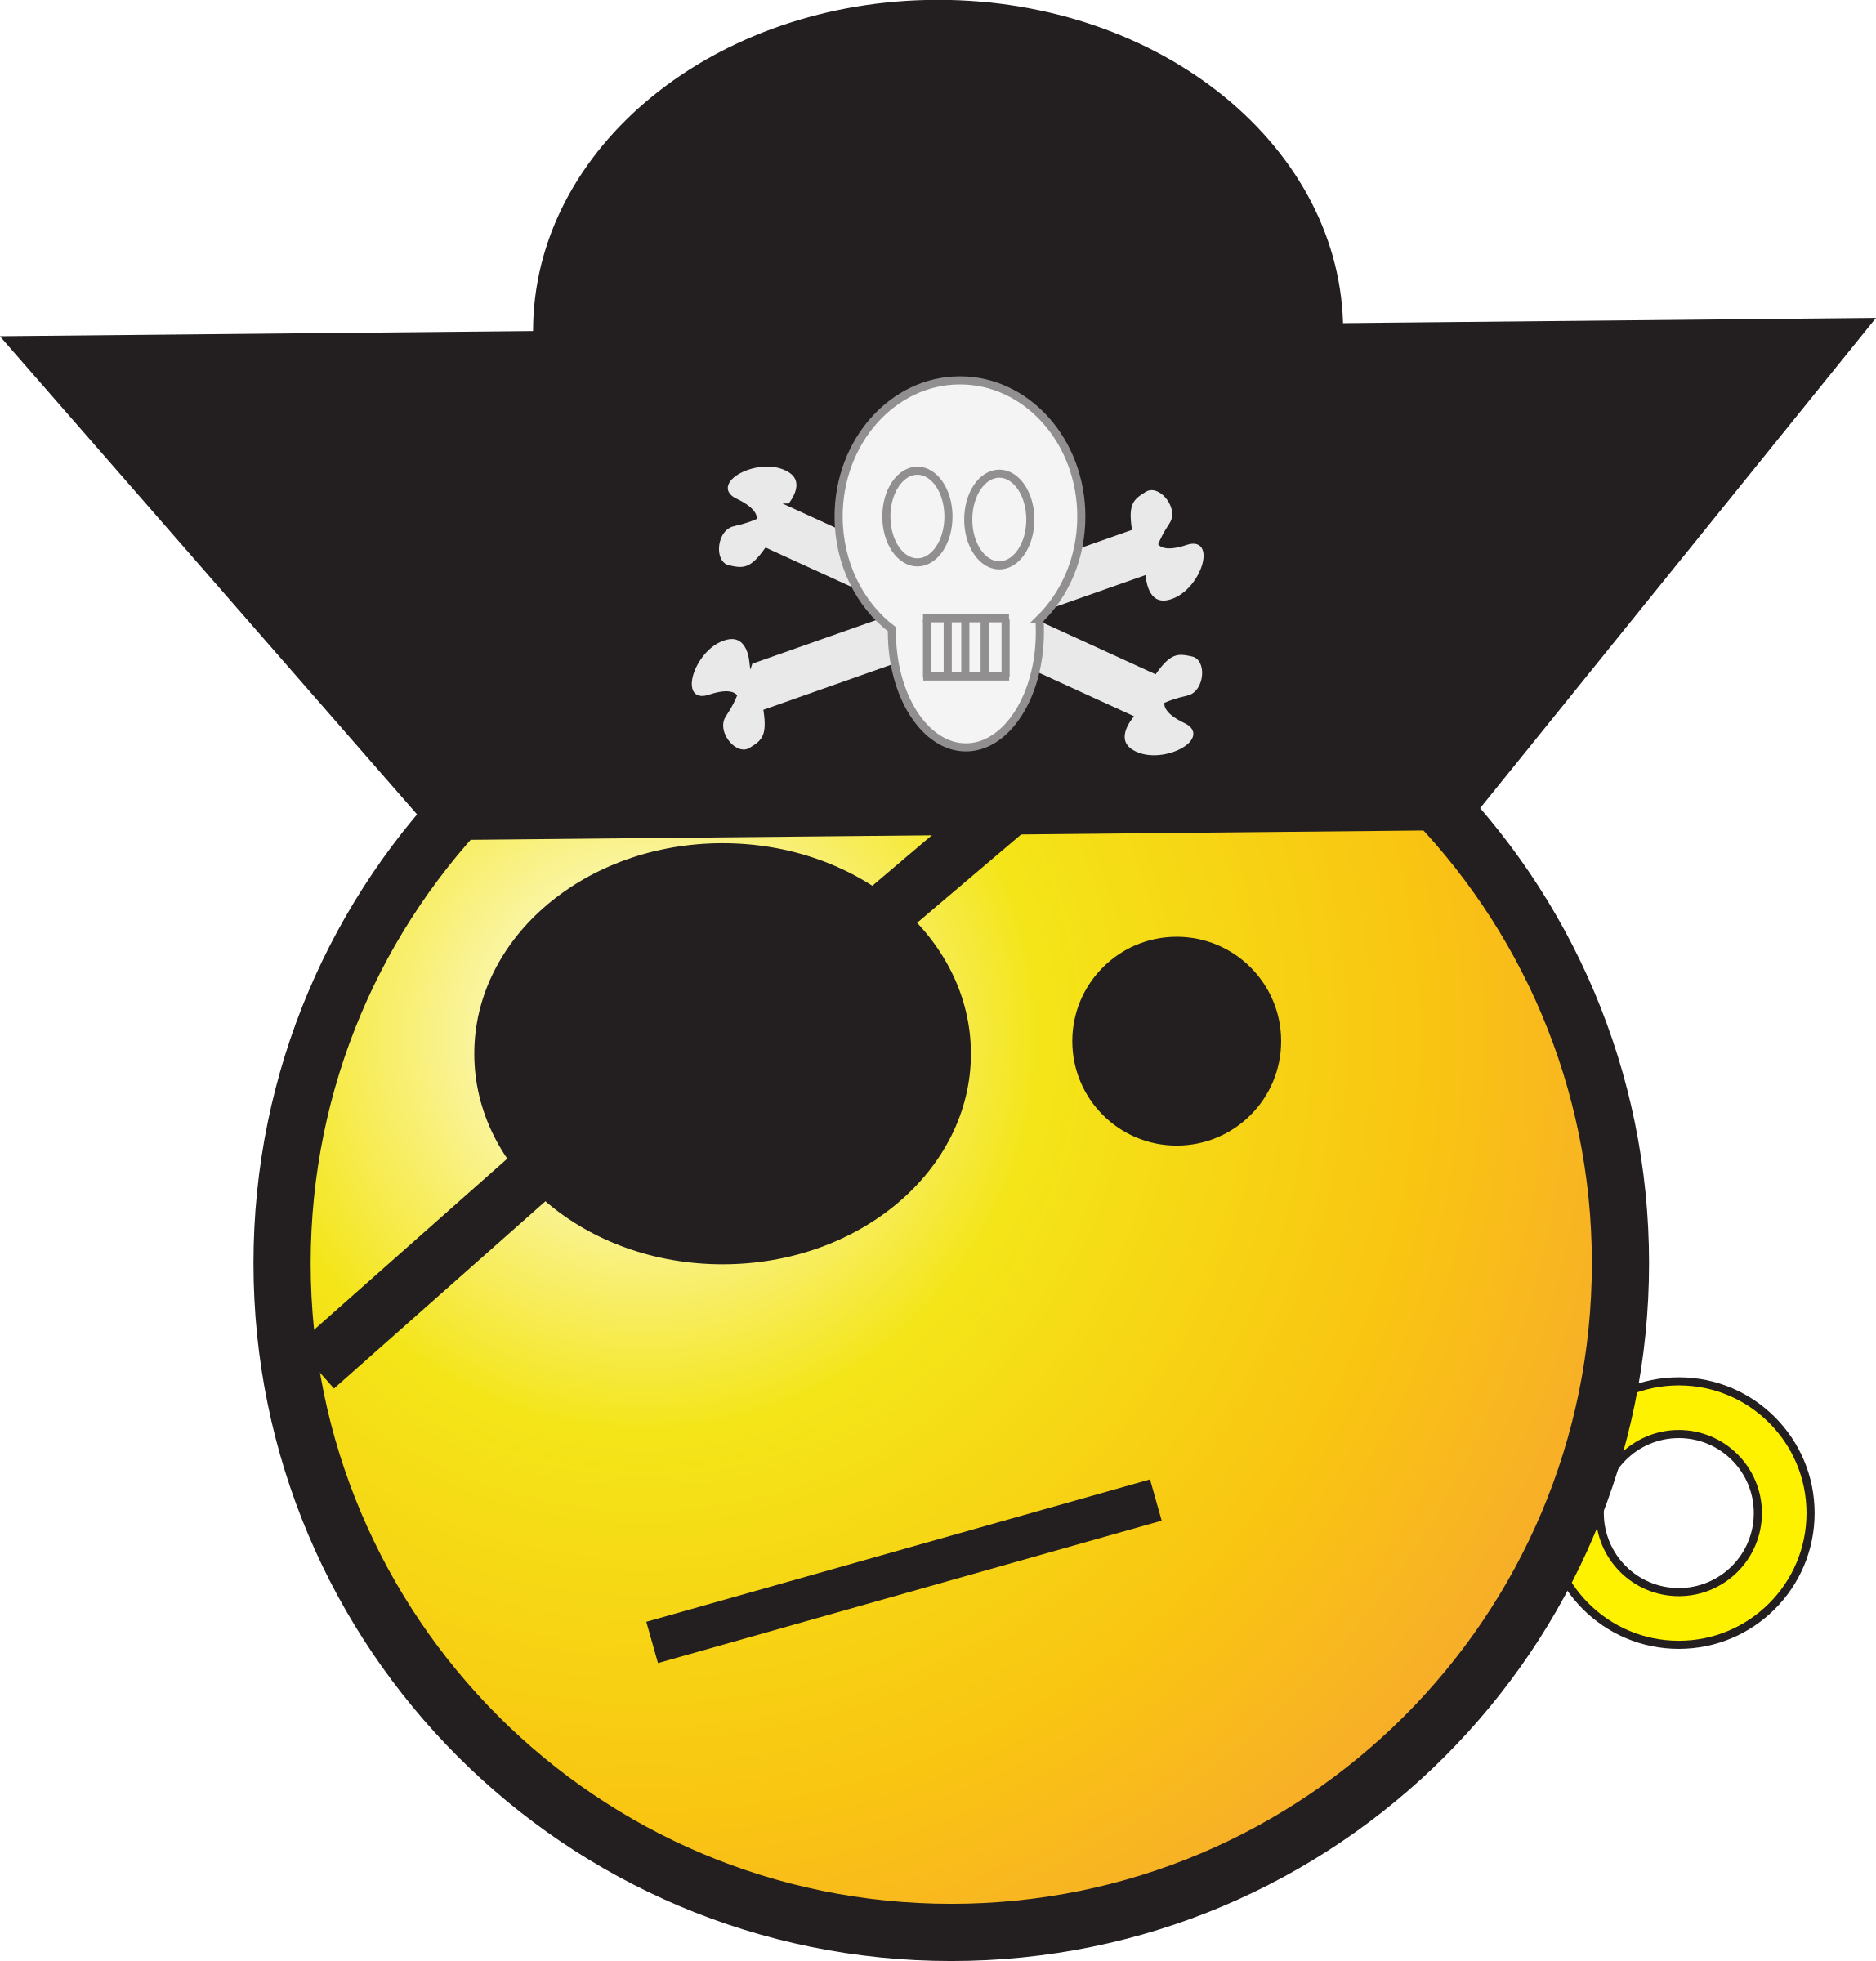 Boy Pirate Images - Truly Teague Throw Pillow Smiley Face Pirate (2296x2400)